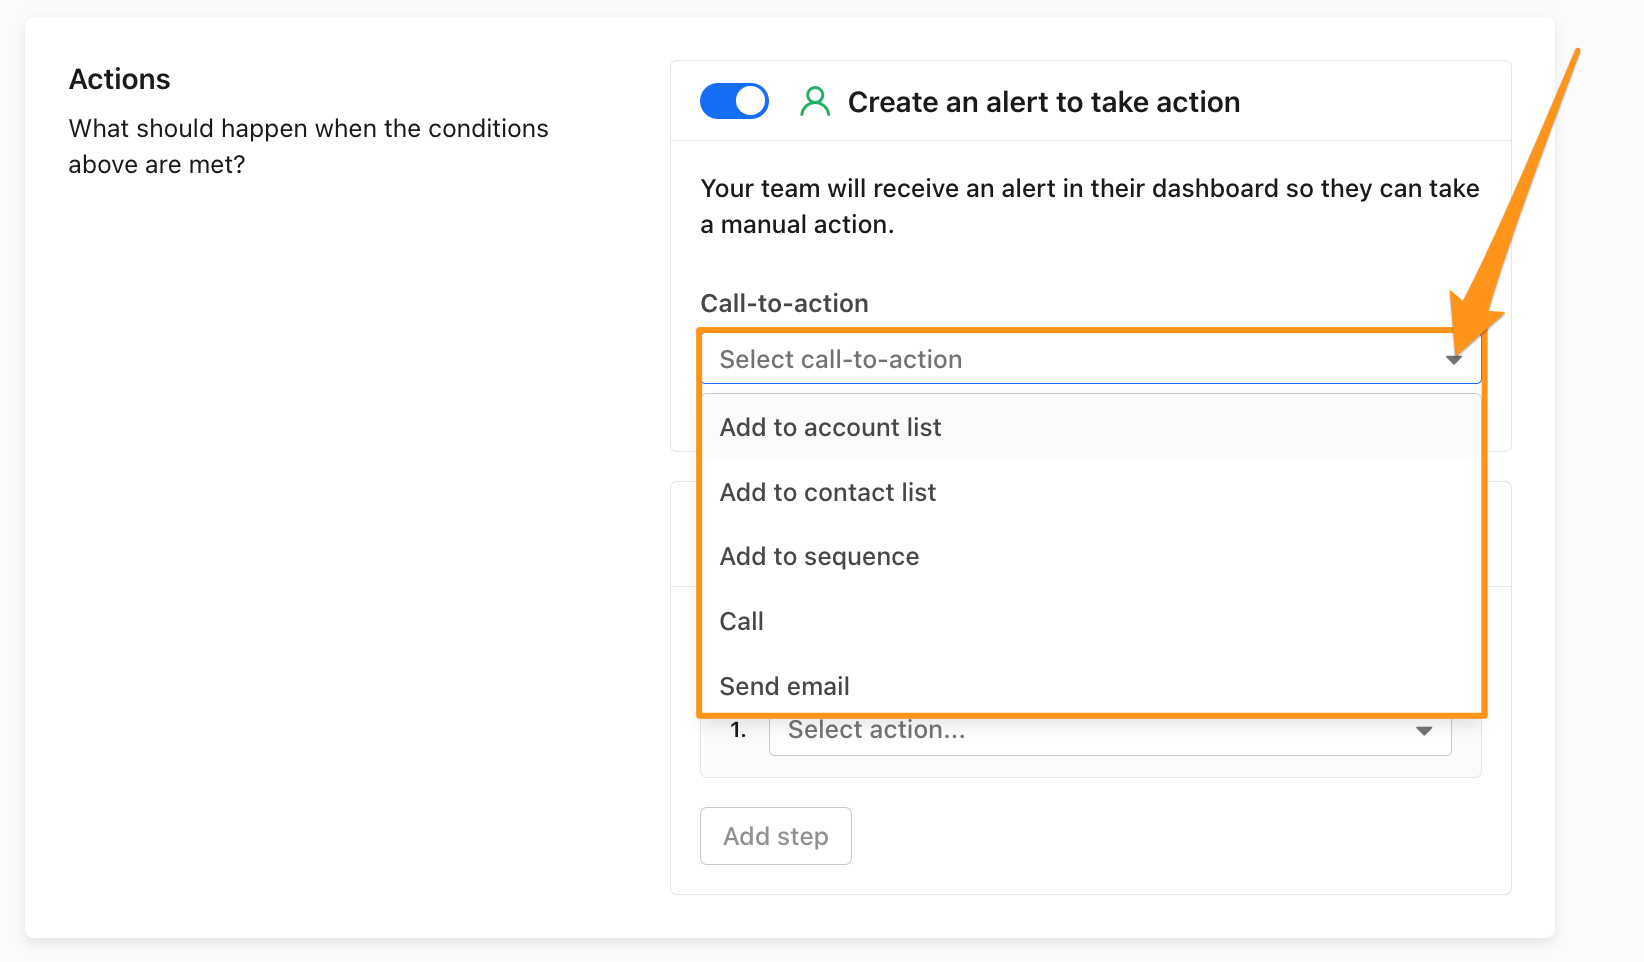 Call to action drop-down